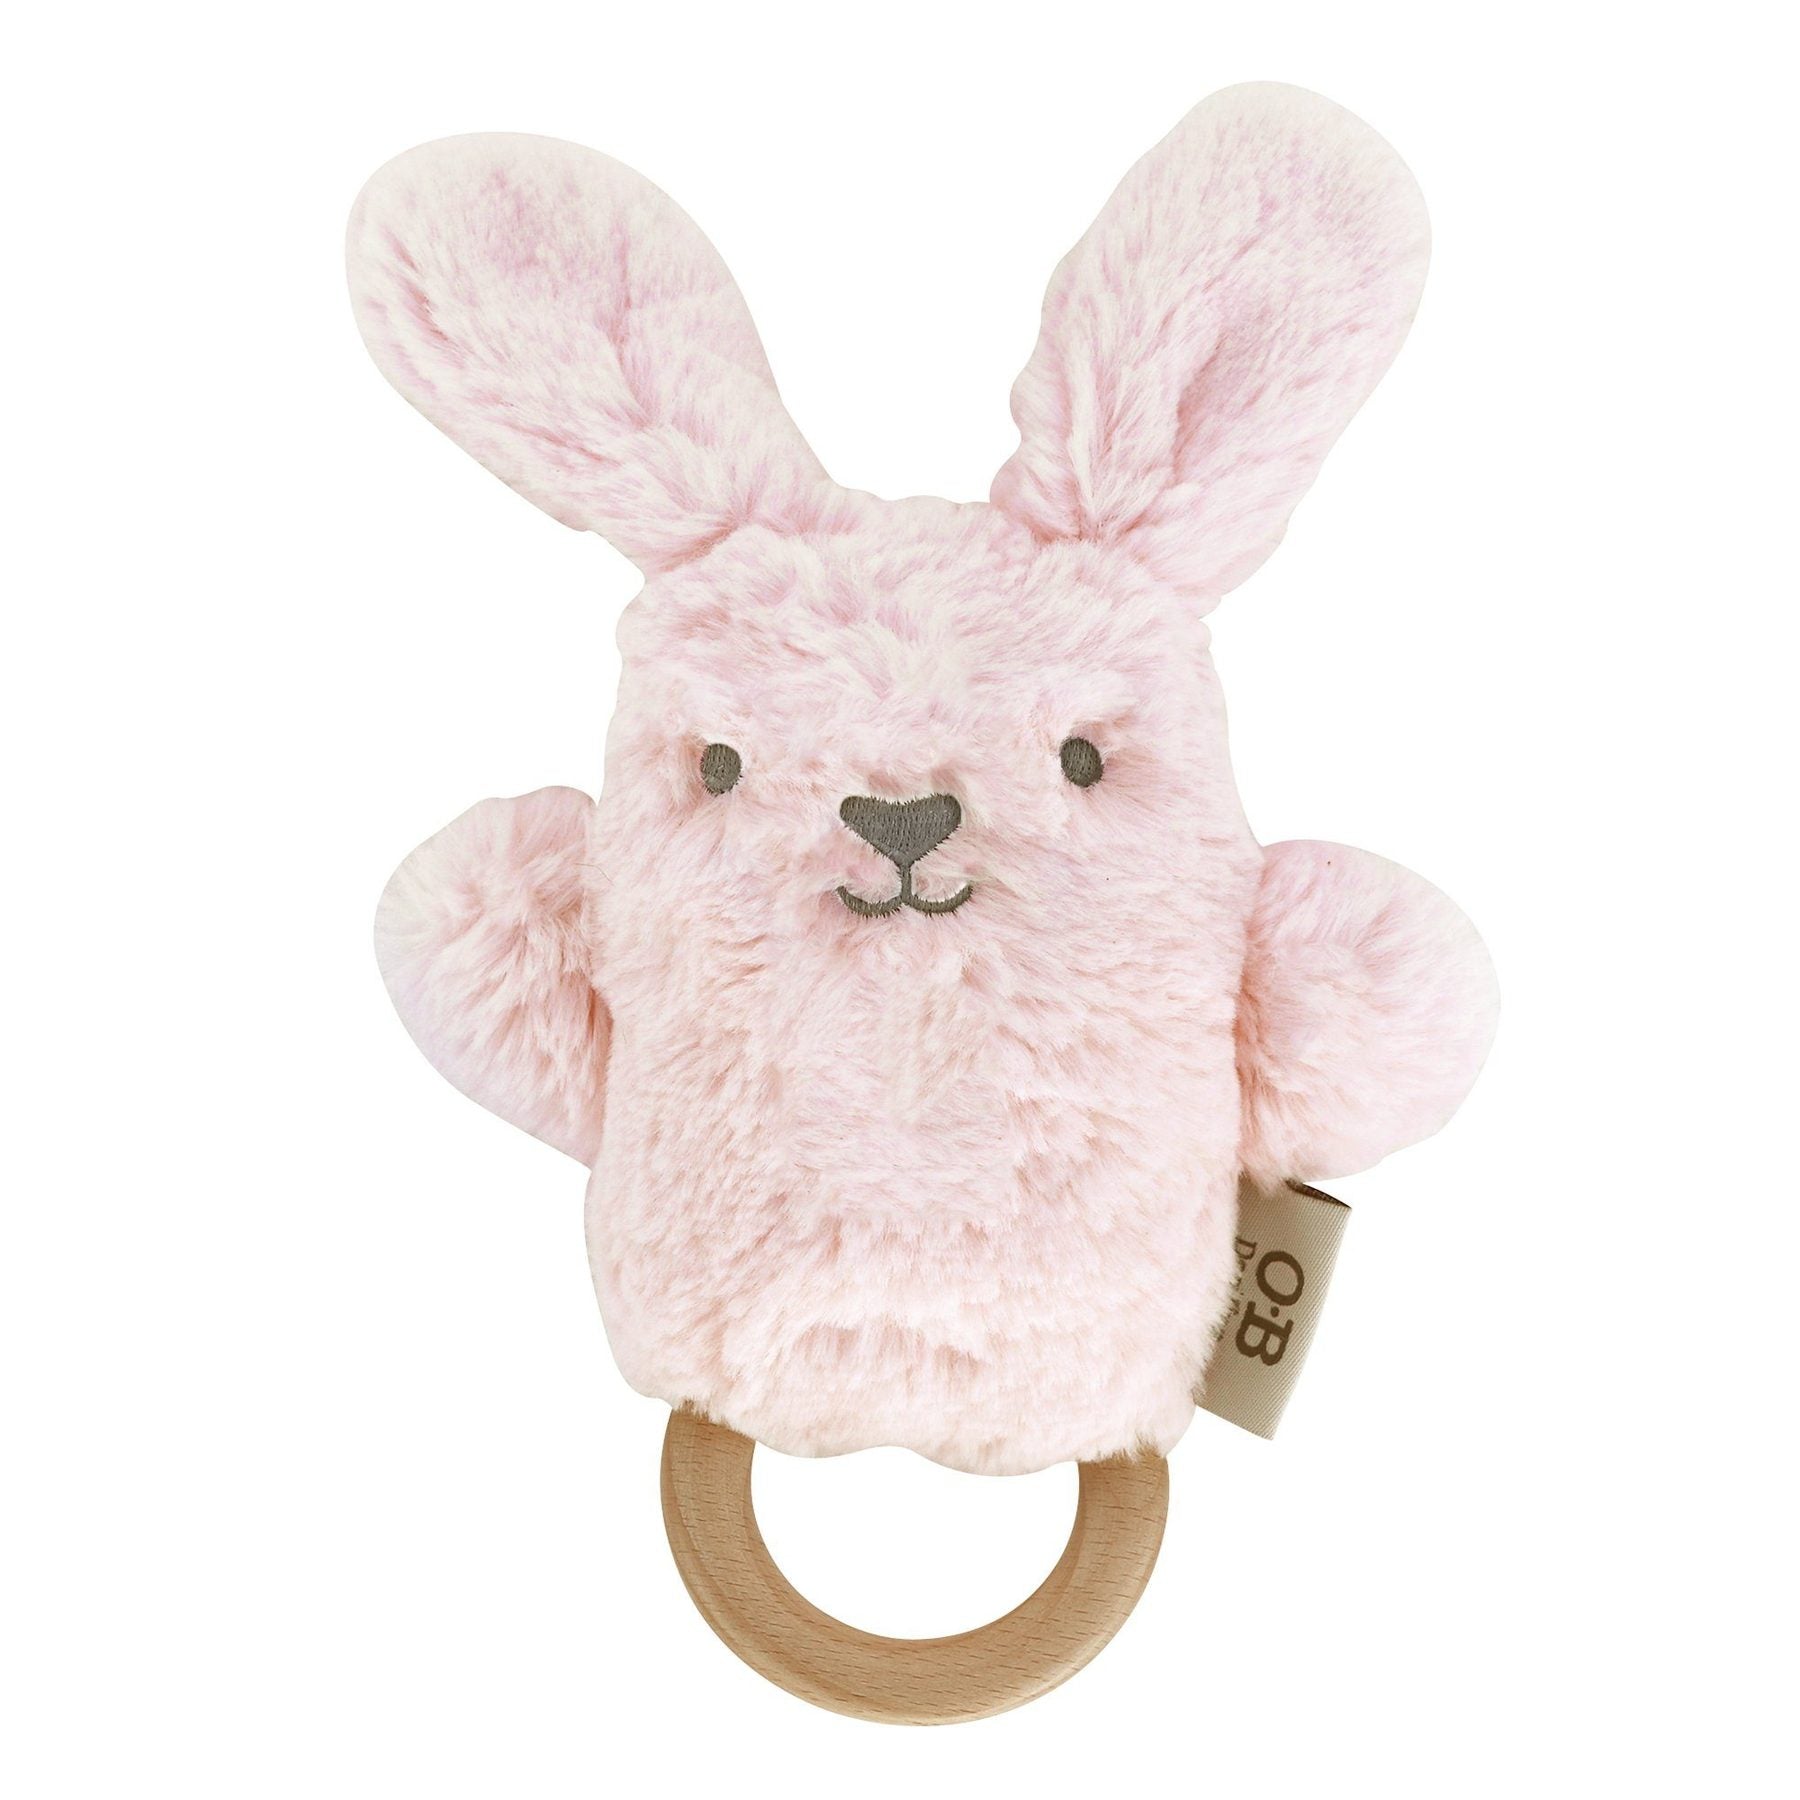 Betsy Bunny Rattle/Teether - By O.B Designs